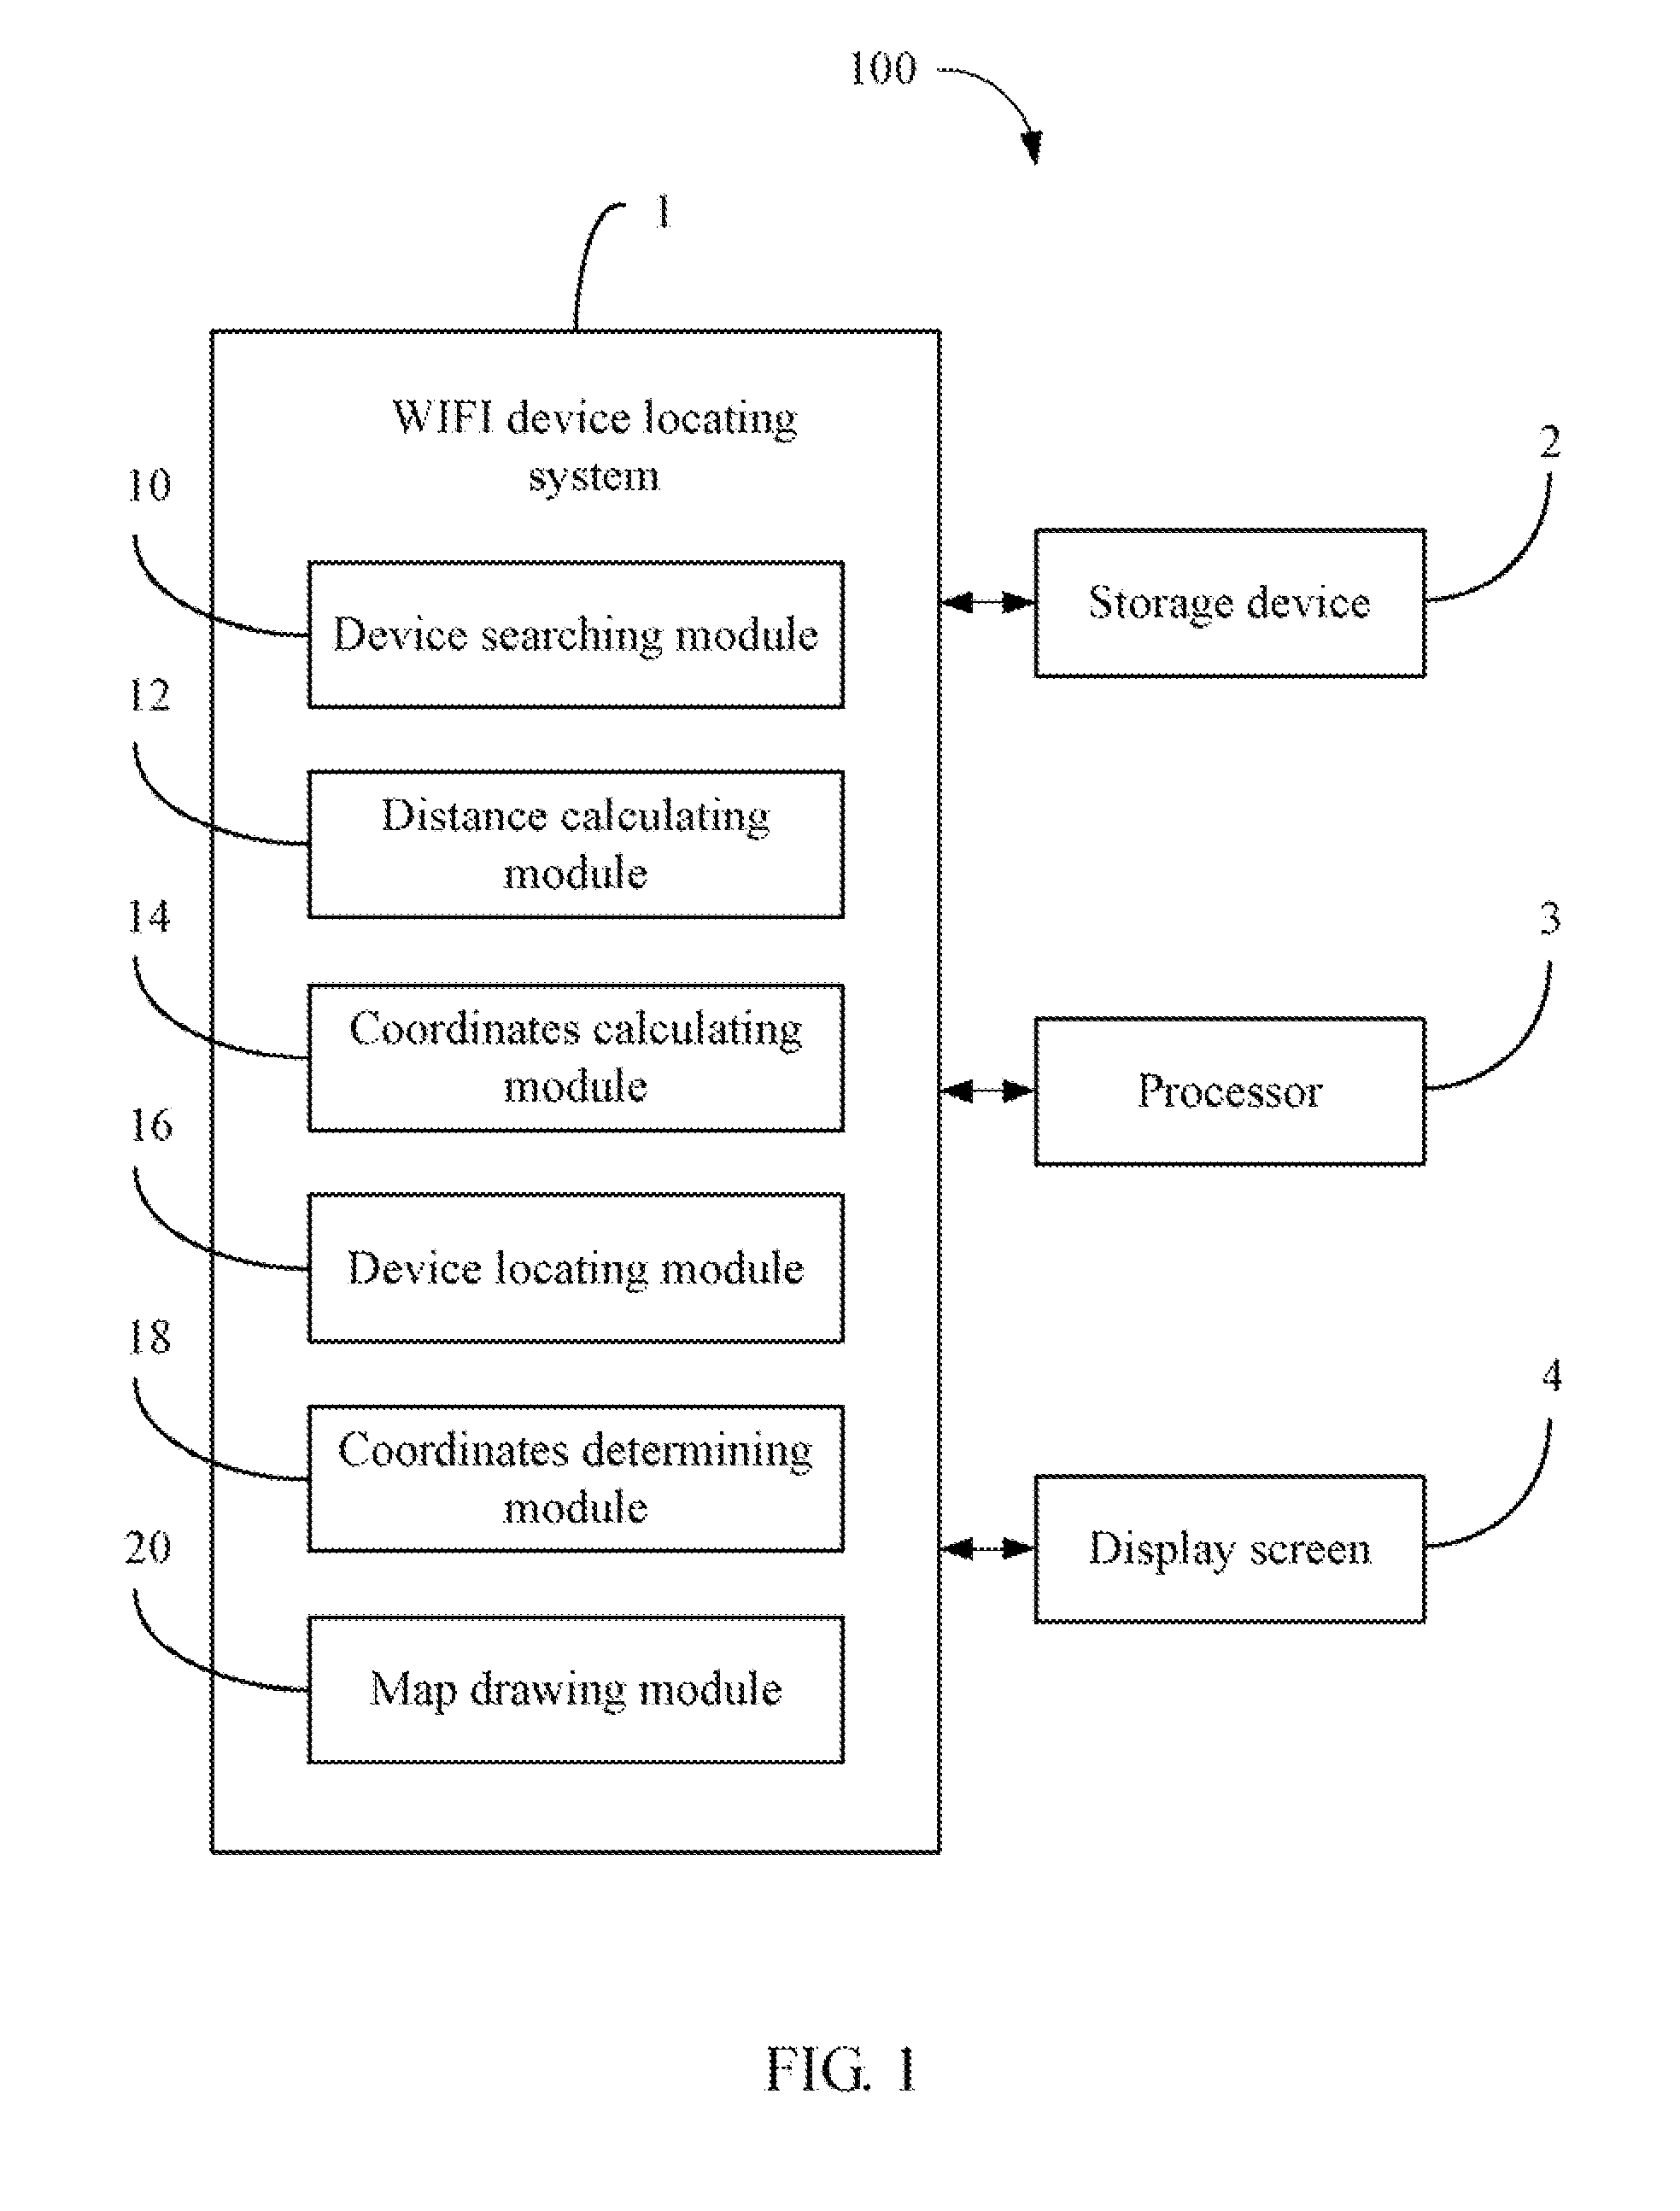 Electronic device and method for locating WIFI devices adjacent to the electronic device